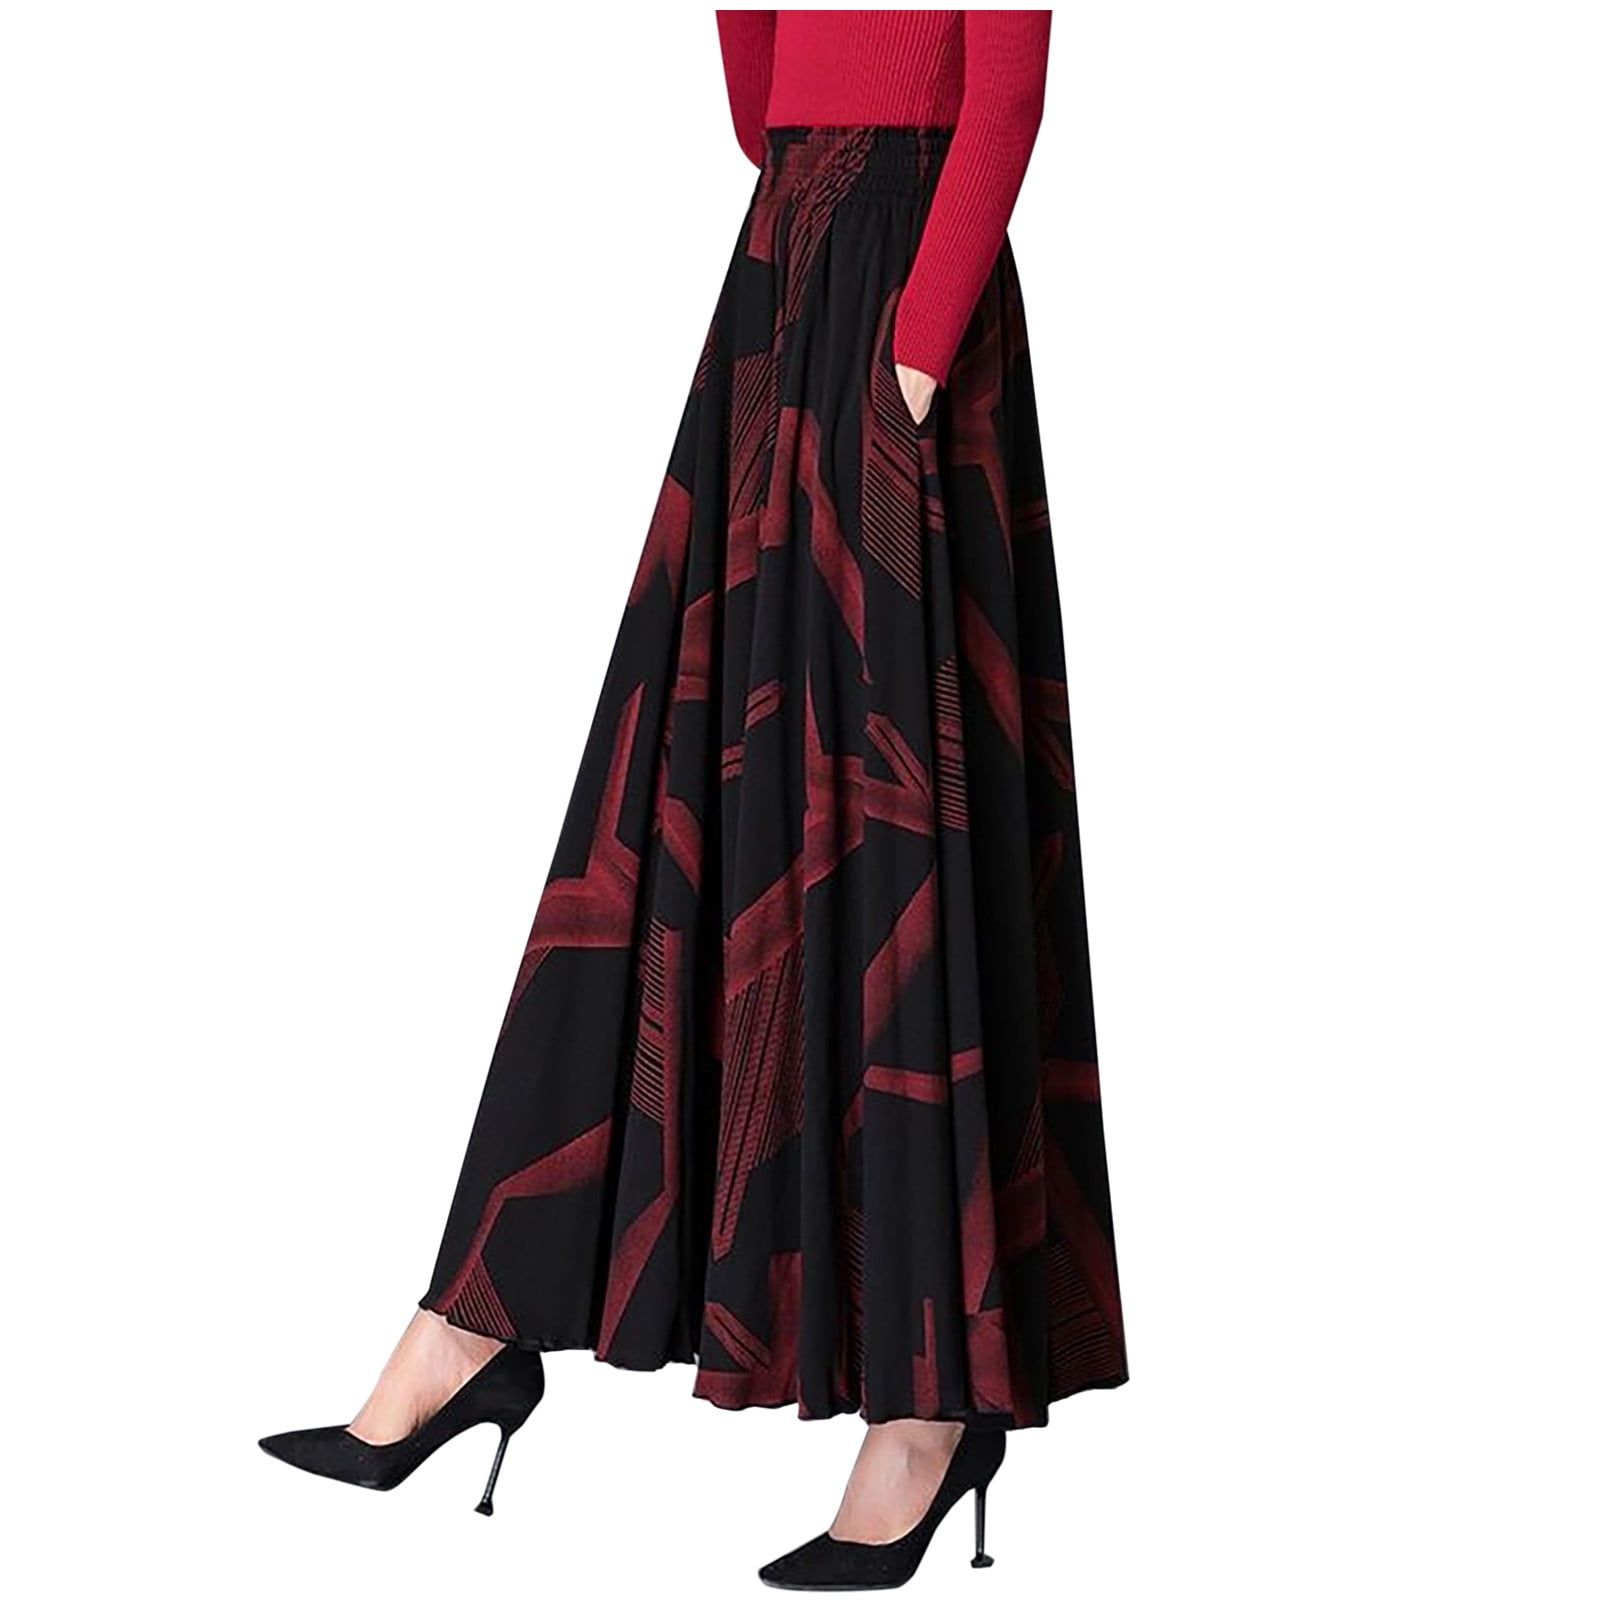 Women's Vintage Long Skirts High Waisted Fall Winter Skirt Casual Flare ...